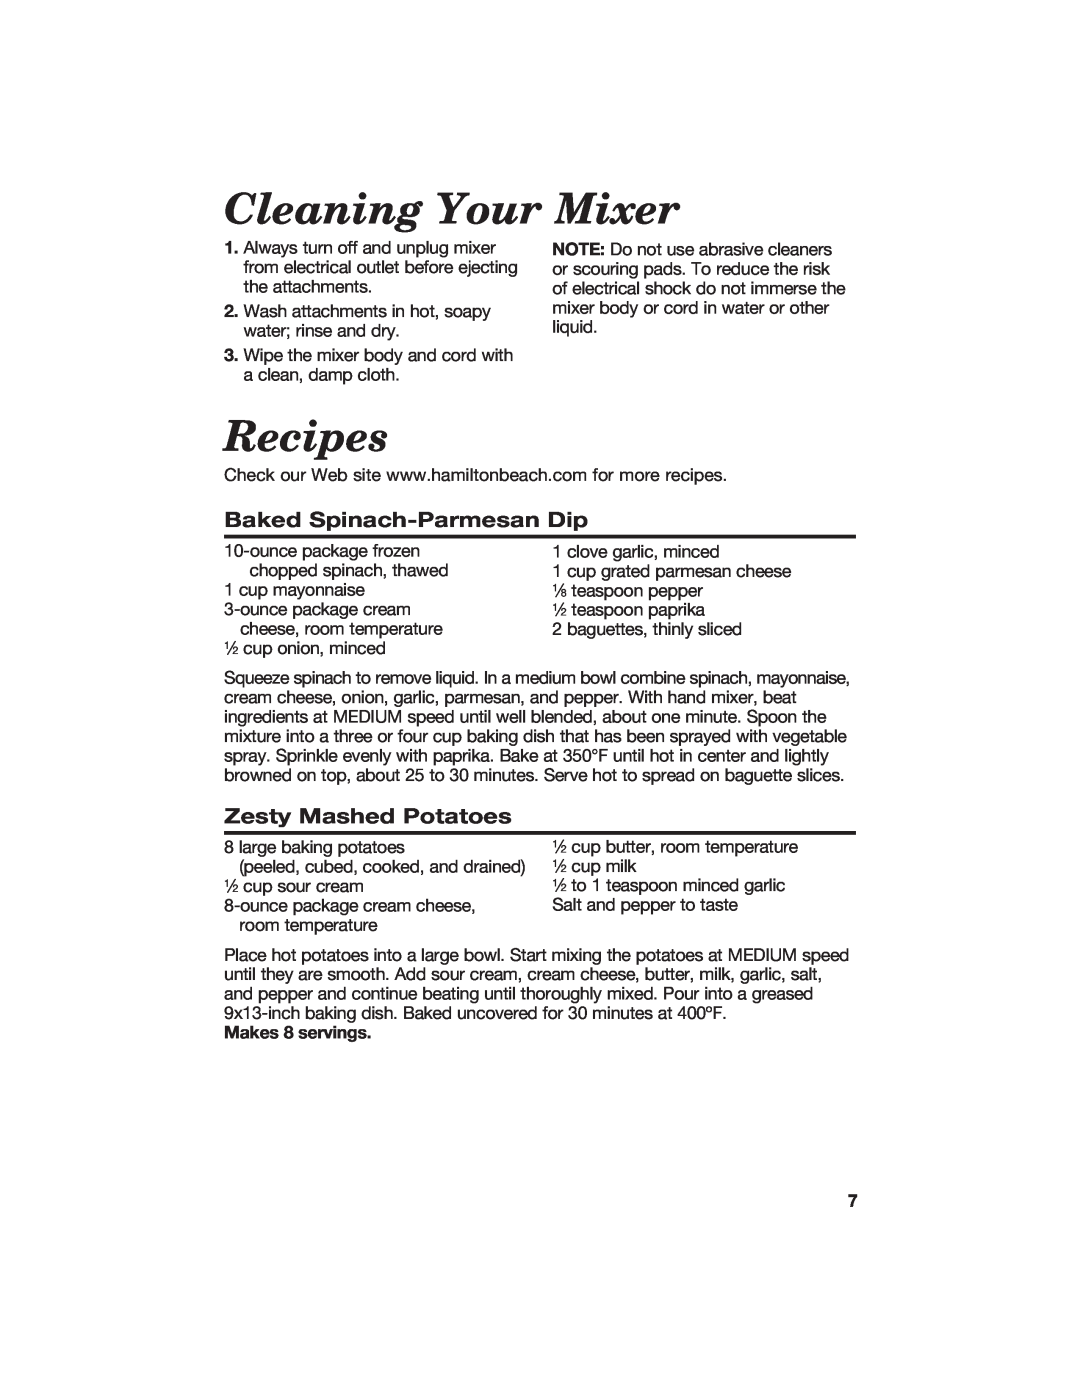 Hamilton Beach 62515 Cleaning Your Mixer, Recipes, Baked Spinach-ParmesanDip, Zesty Mashed Potatoes, Makes 8 servings 